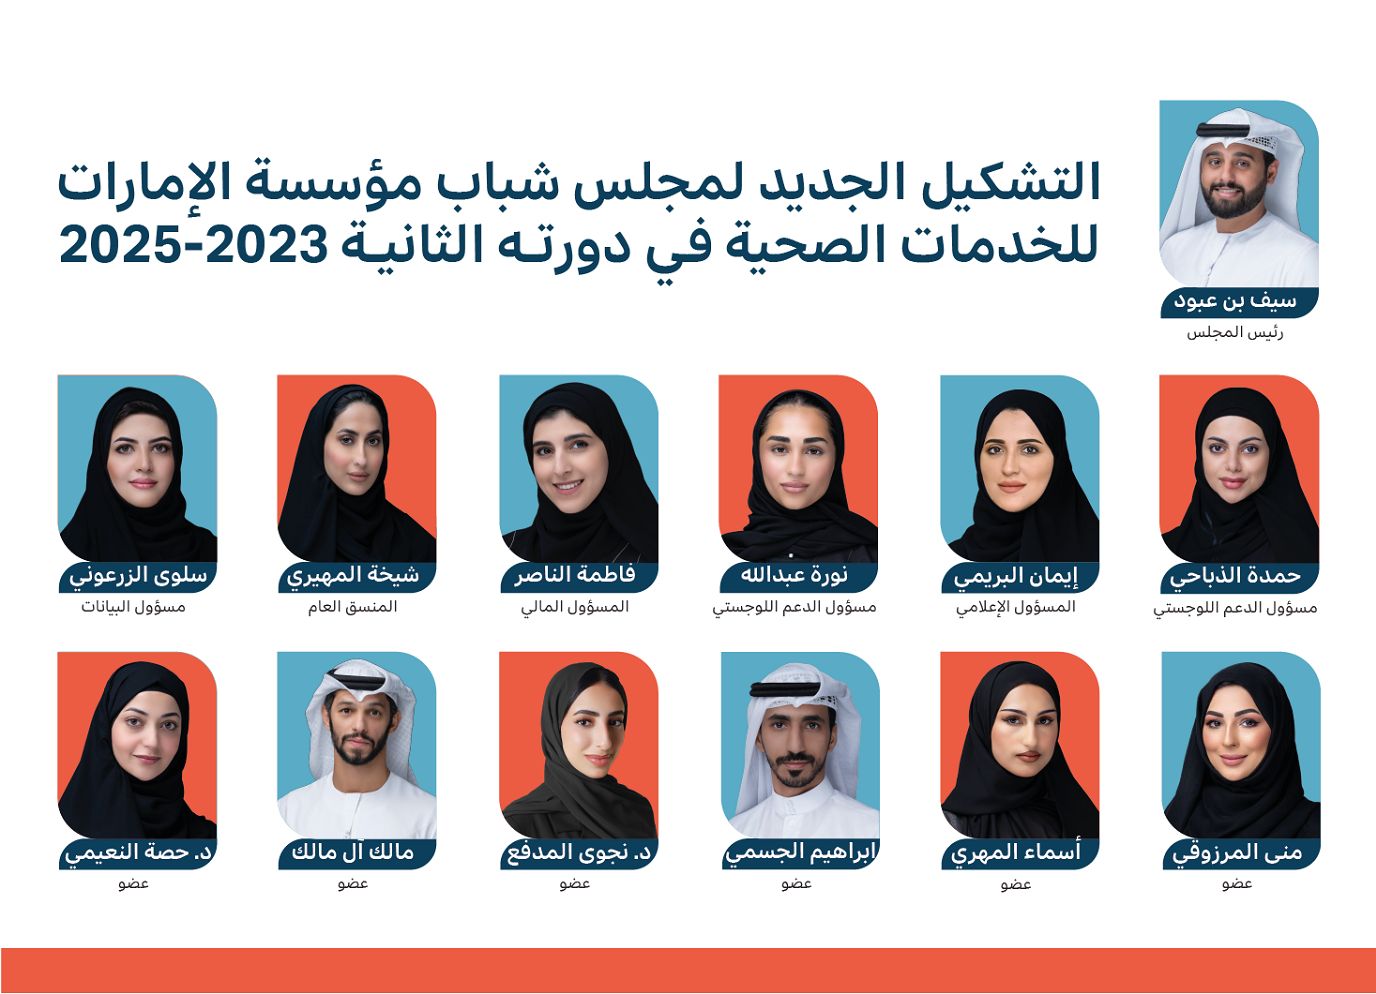 Emirates Health Services announces the new formation of the Youth Council 2023-2025